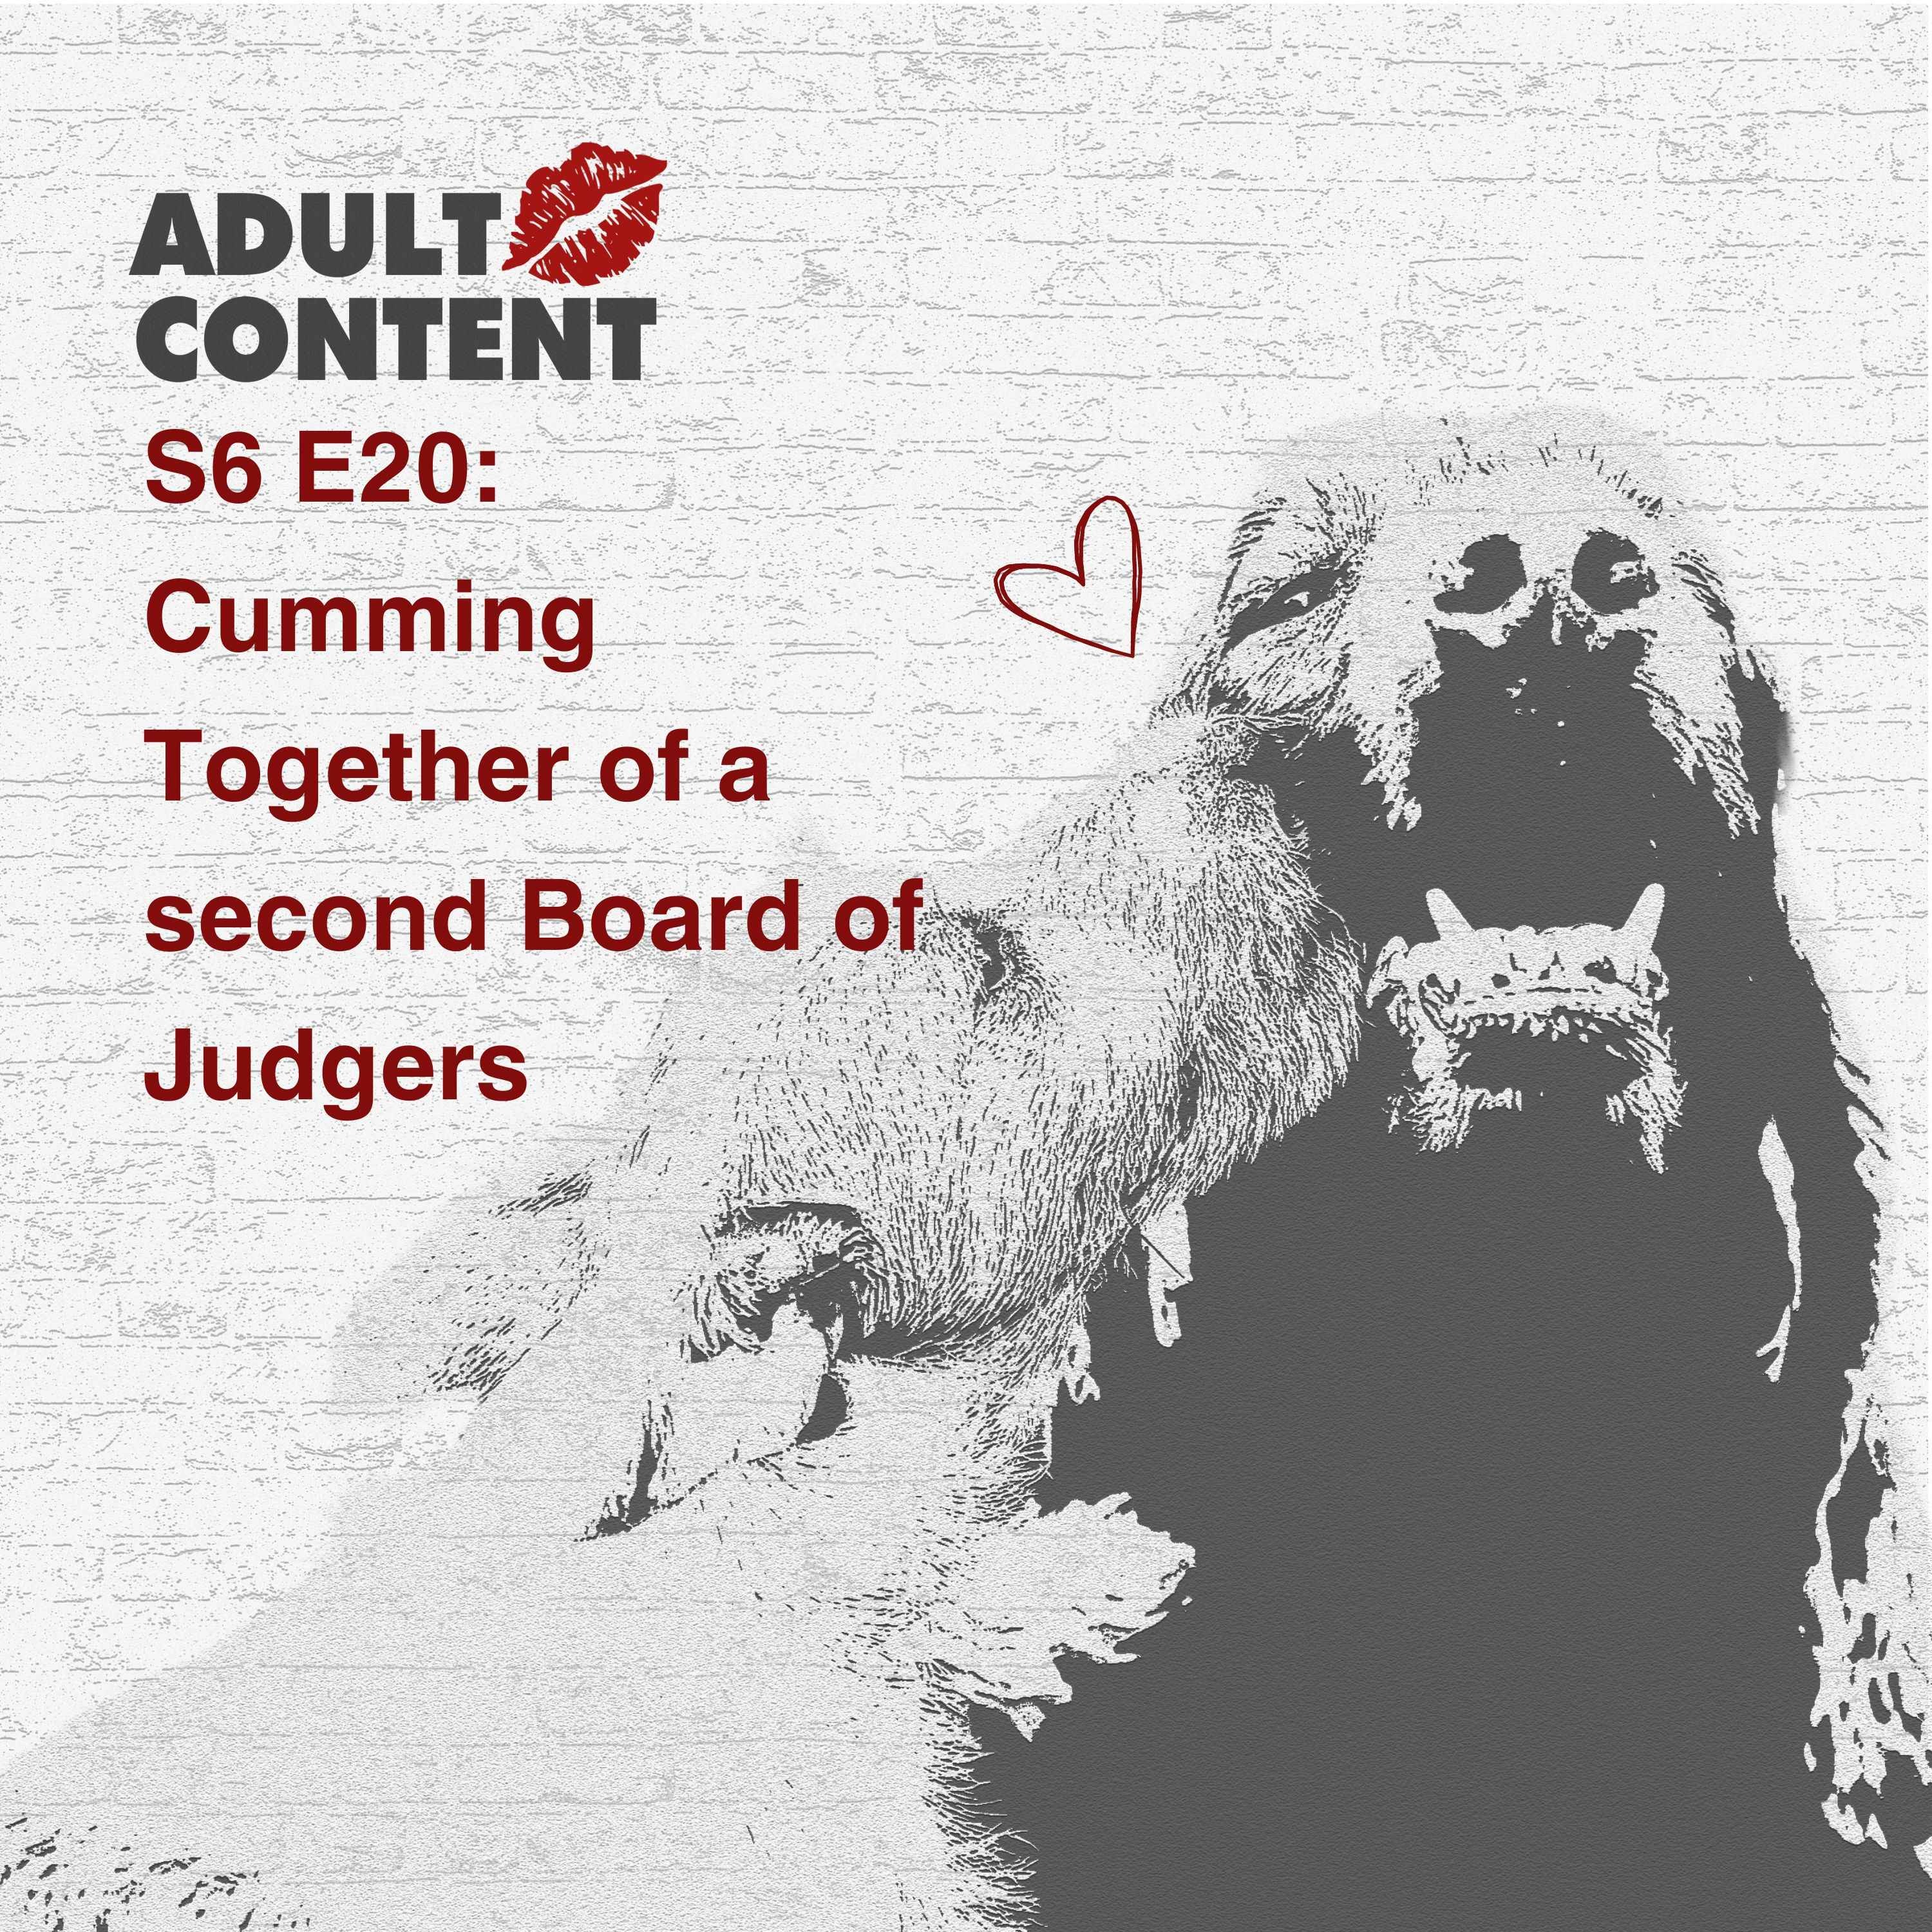 S6 E20: Cumming Together of a second Board of Judgers